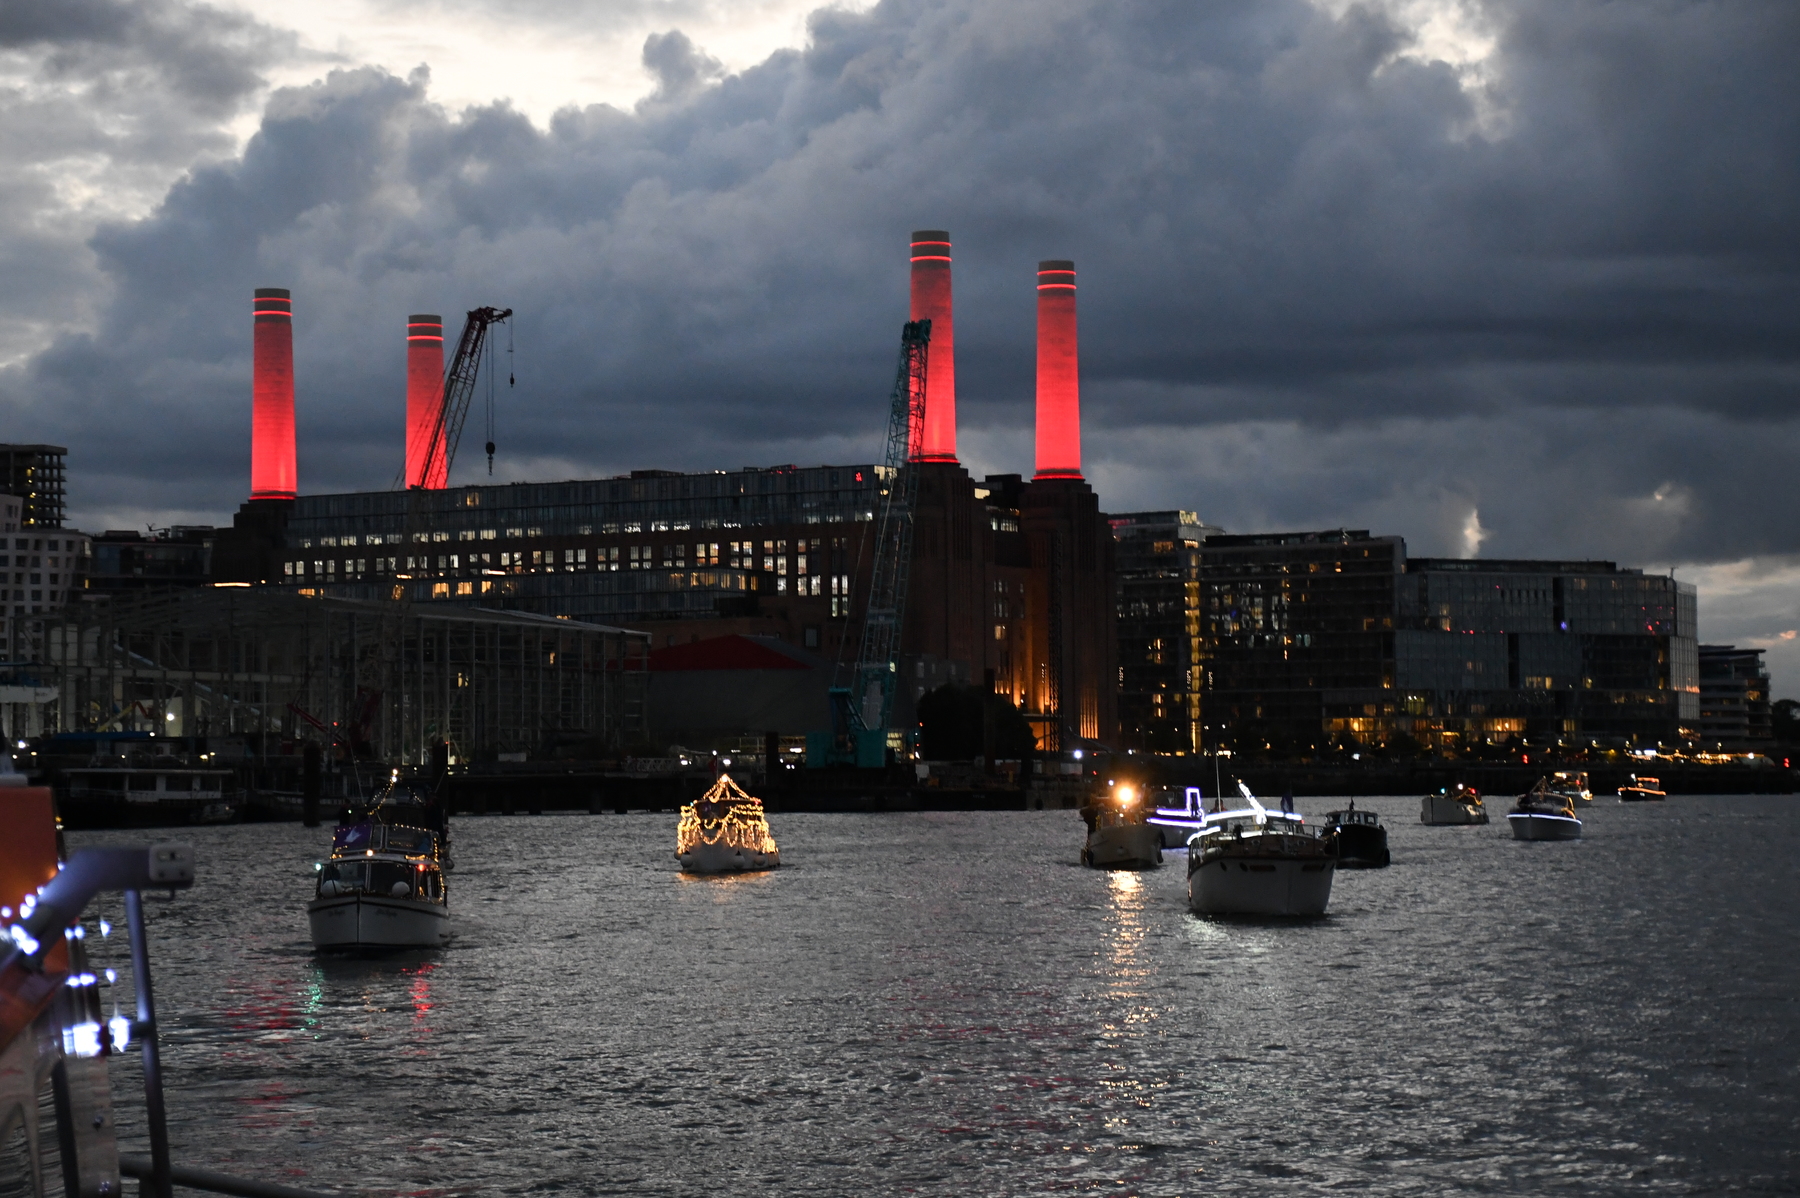 Reflections Parade passing Battersea power station